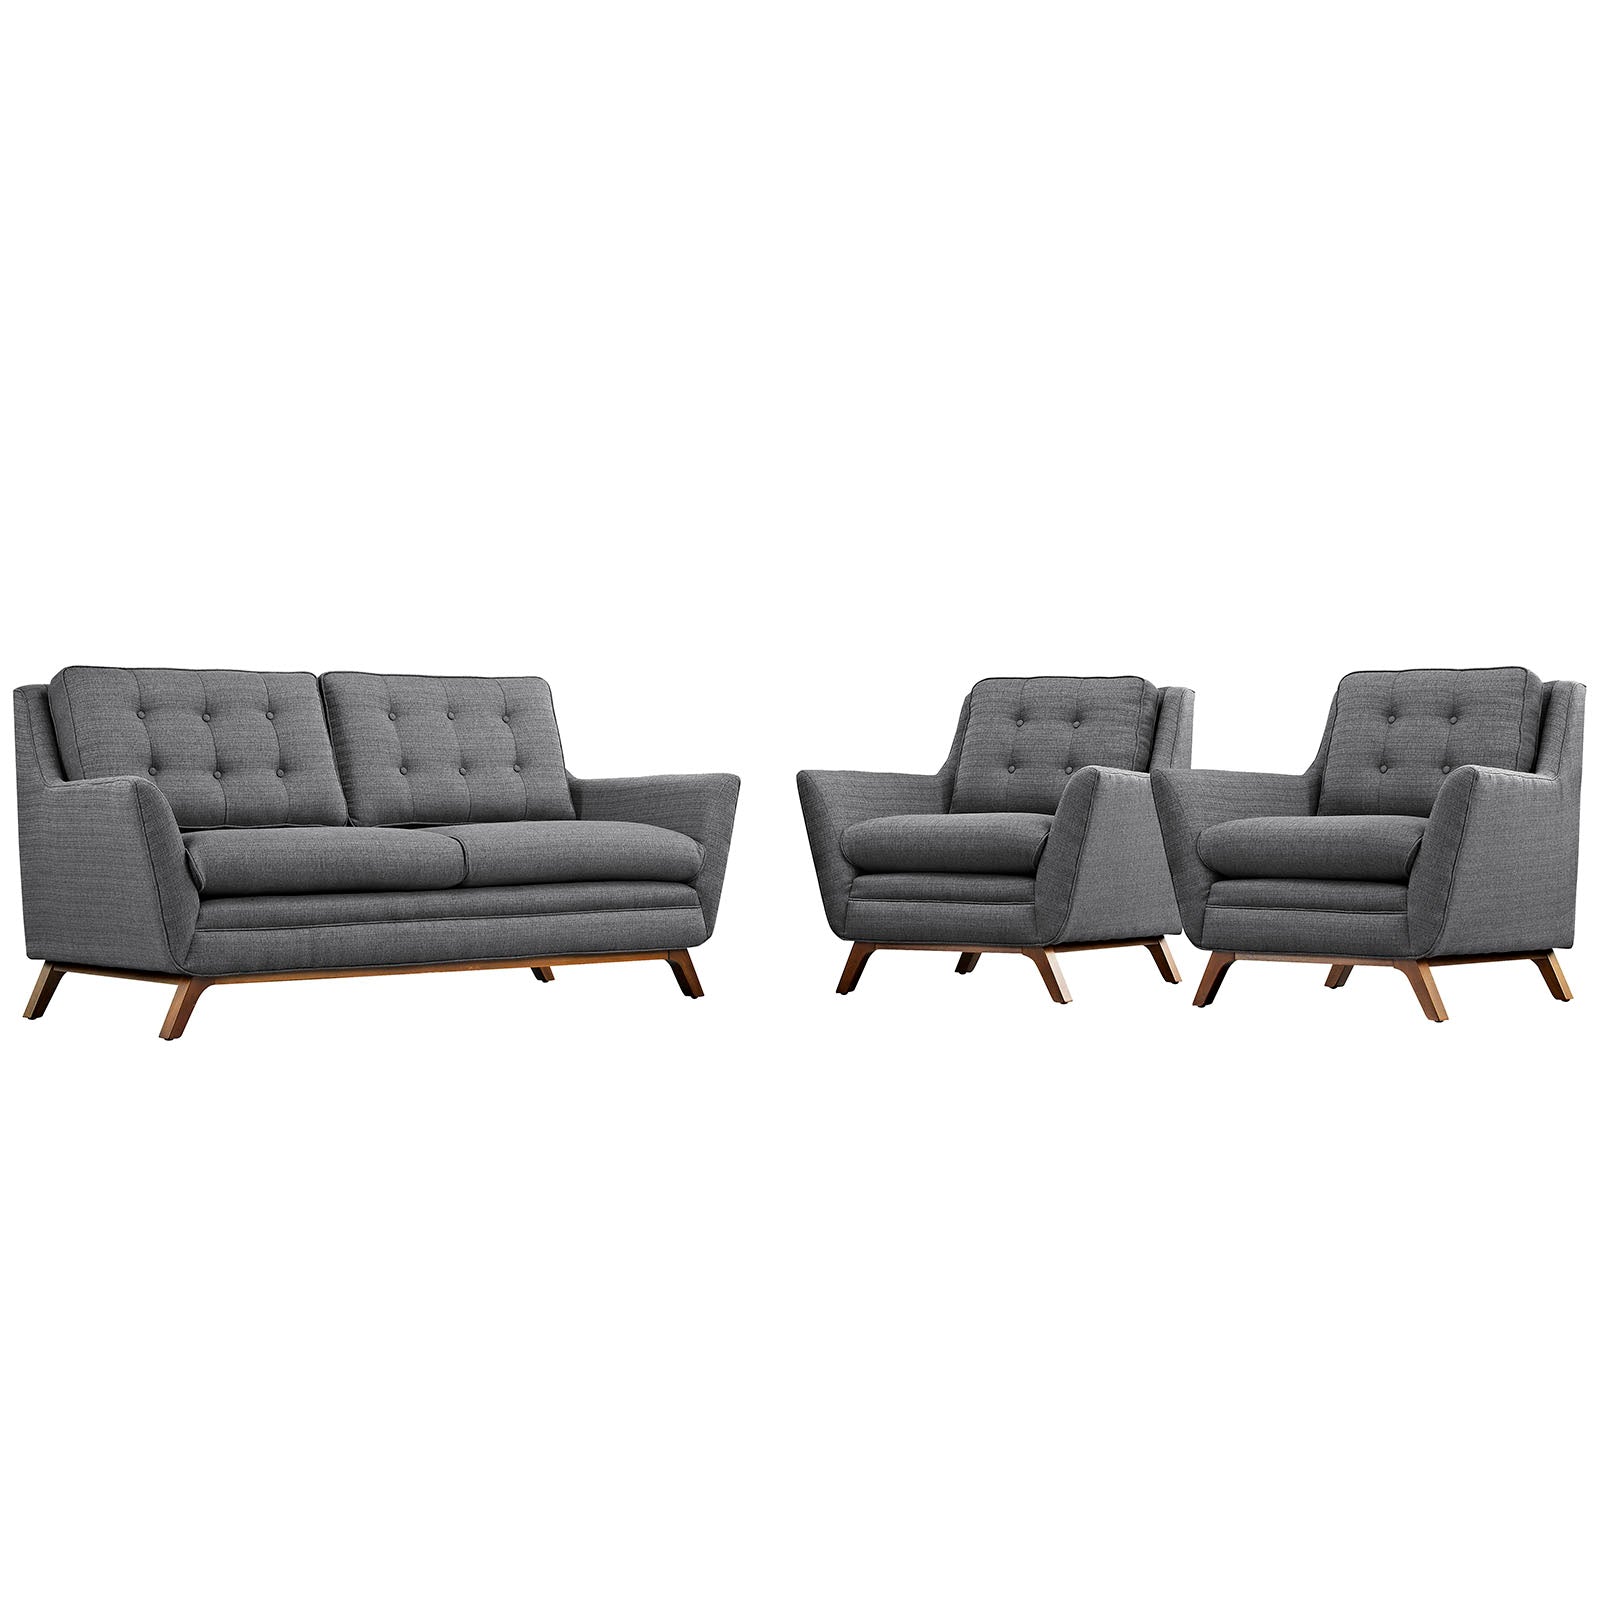 Beguile 3 Piece Upholstered Fabric Living Room Set